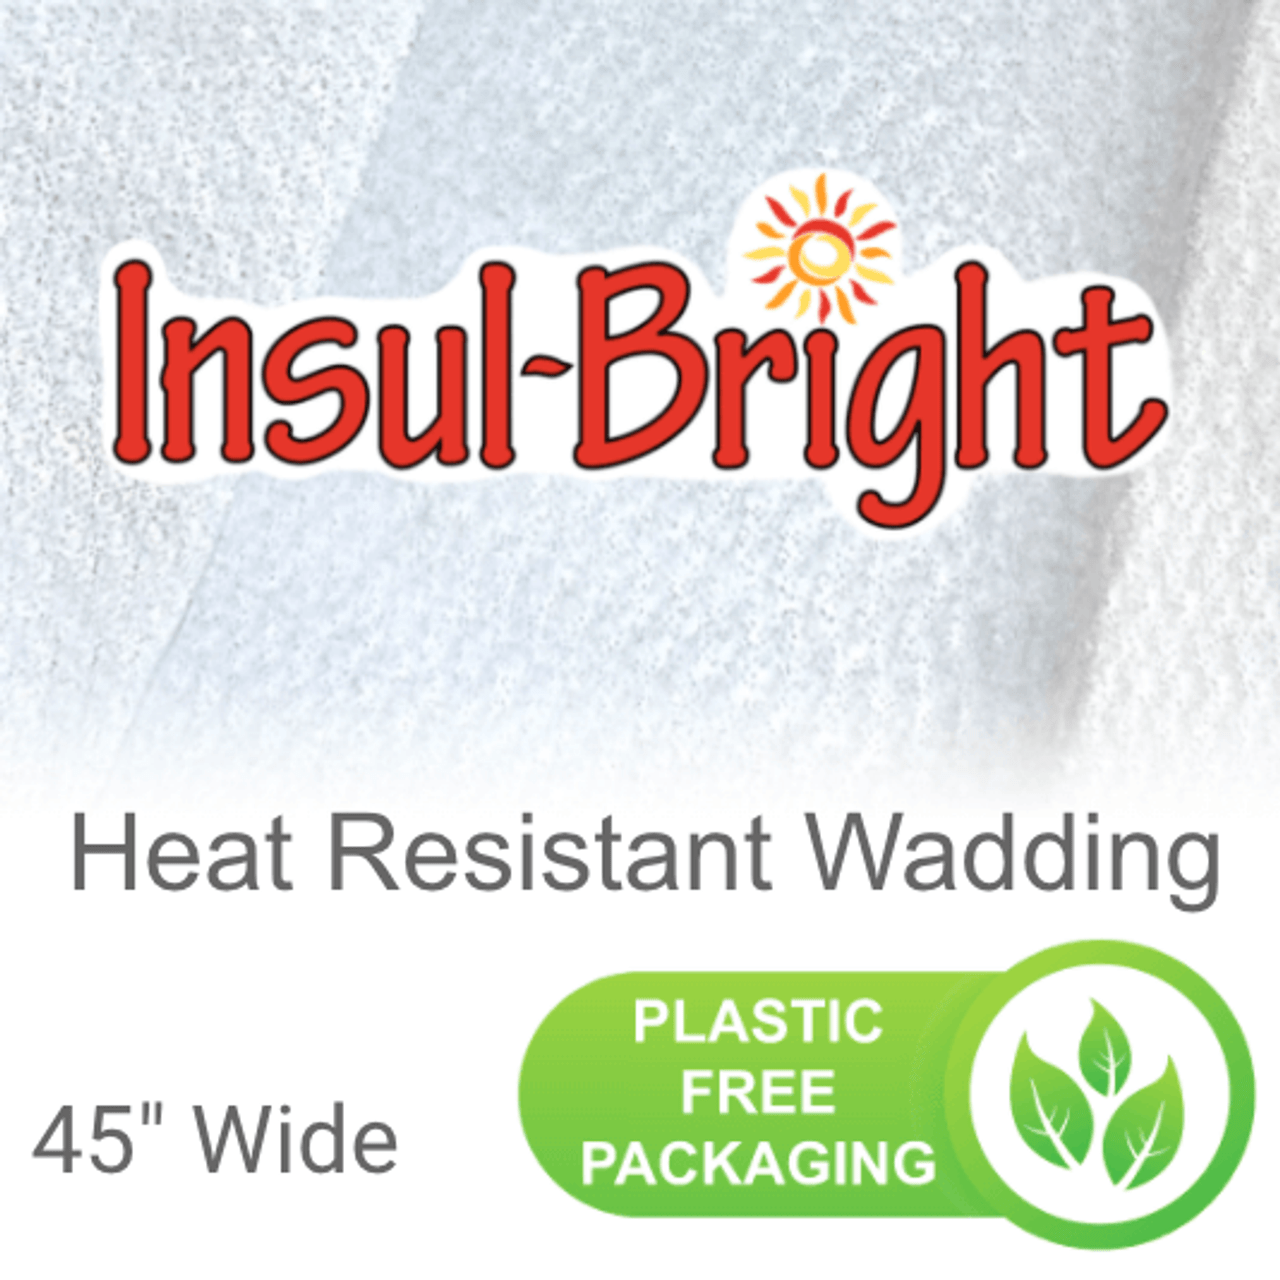 Insul-Bright Heat Resistant Wadding by the Warm Company 45 inches cut to length